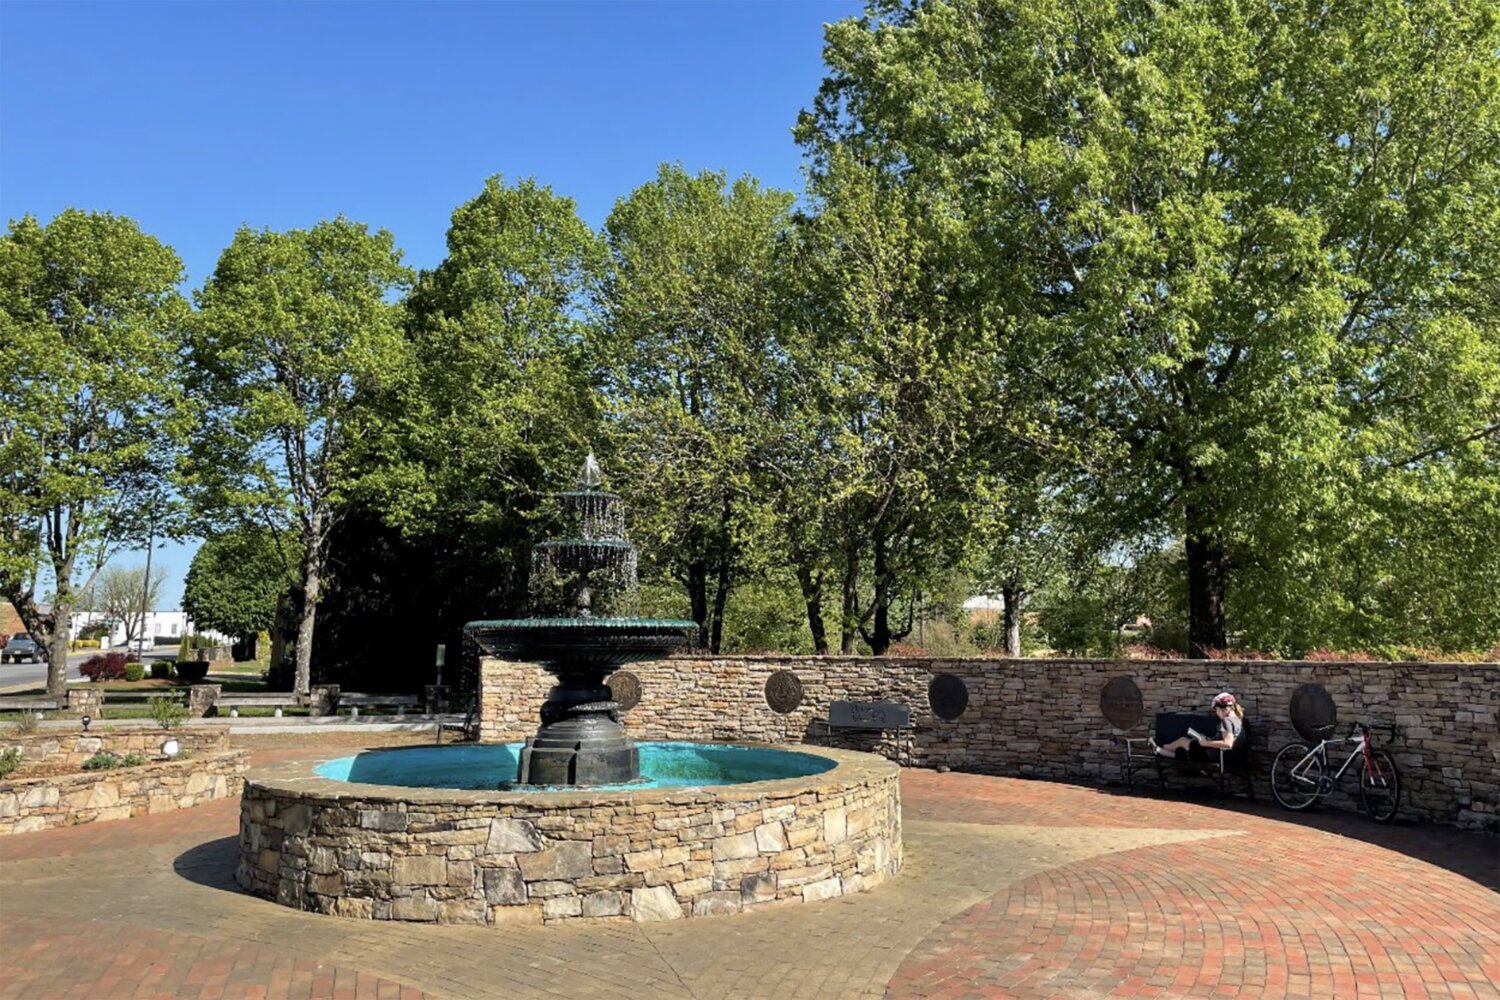 Connecting community outdoor recreational facilities is an important goal in Valdese’s new CORE planning strategy. Downtown parks and naturalized areas encourage visitors to stay a while.